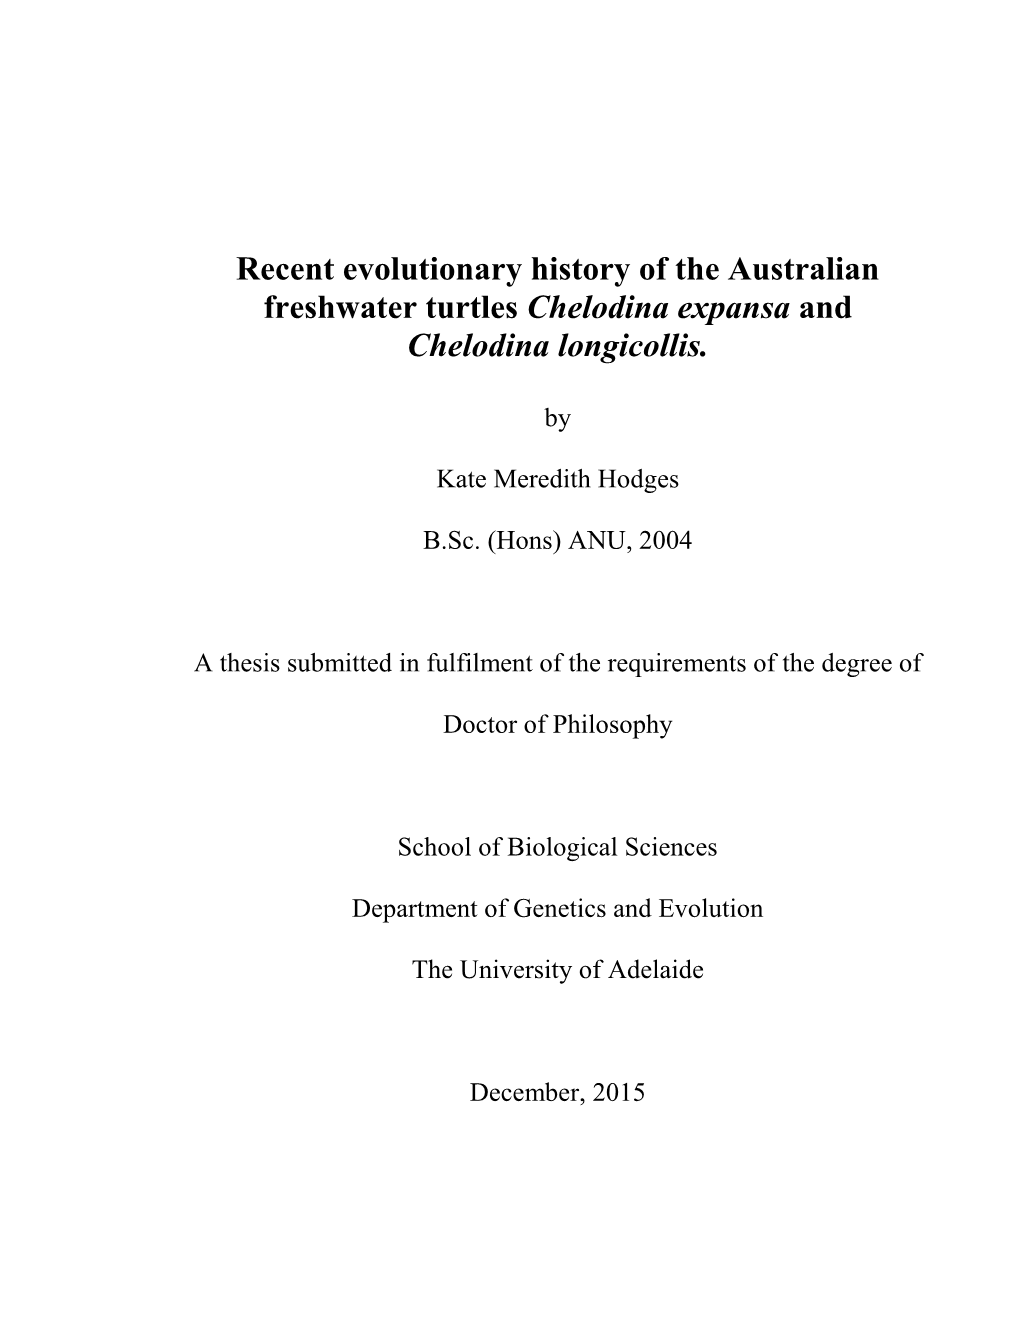 Hodges Phd Thesis 2016